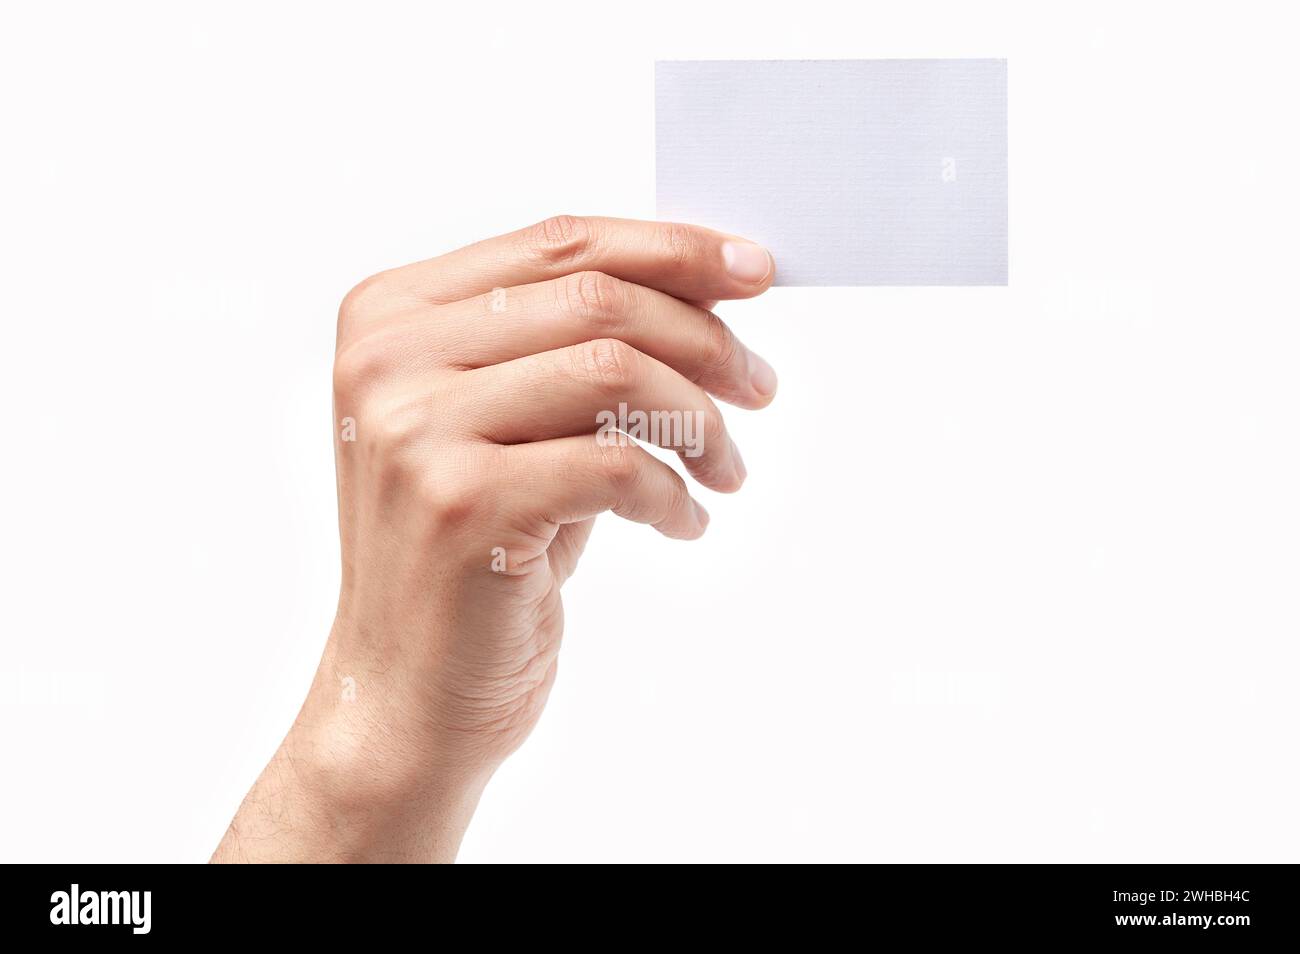 Man hand holding a blank card isolated on a white background Stock Photo